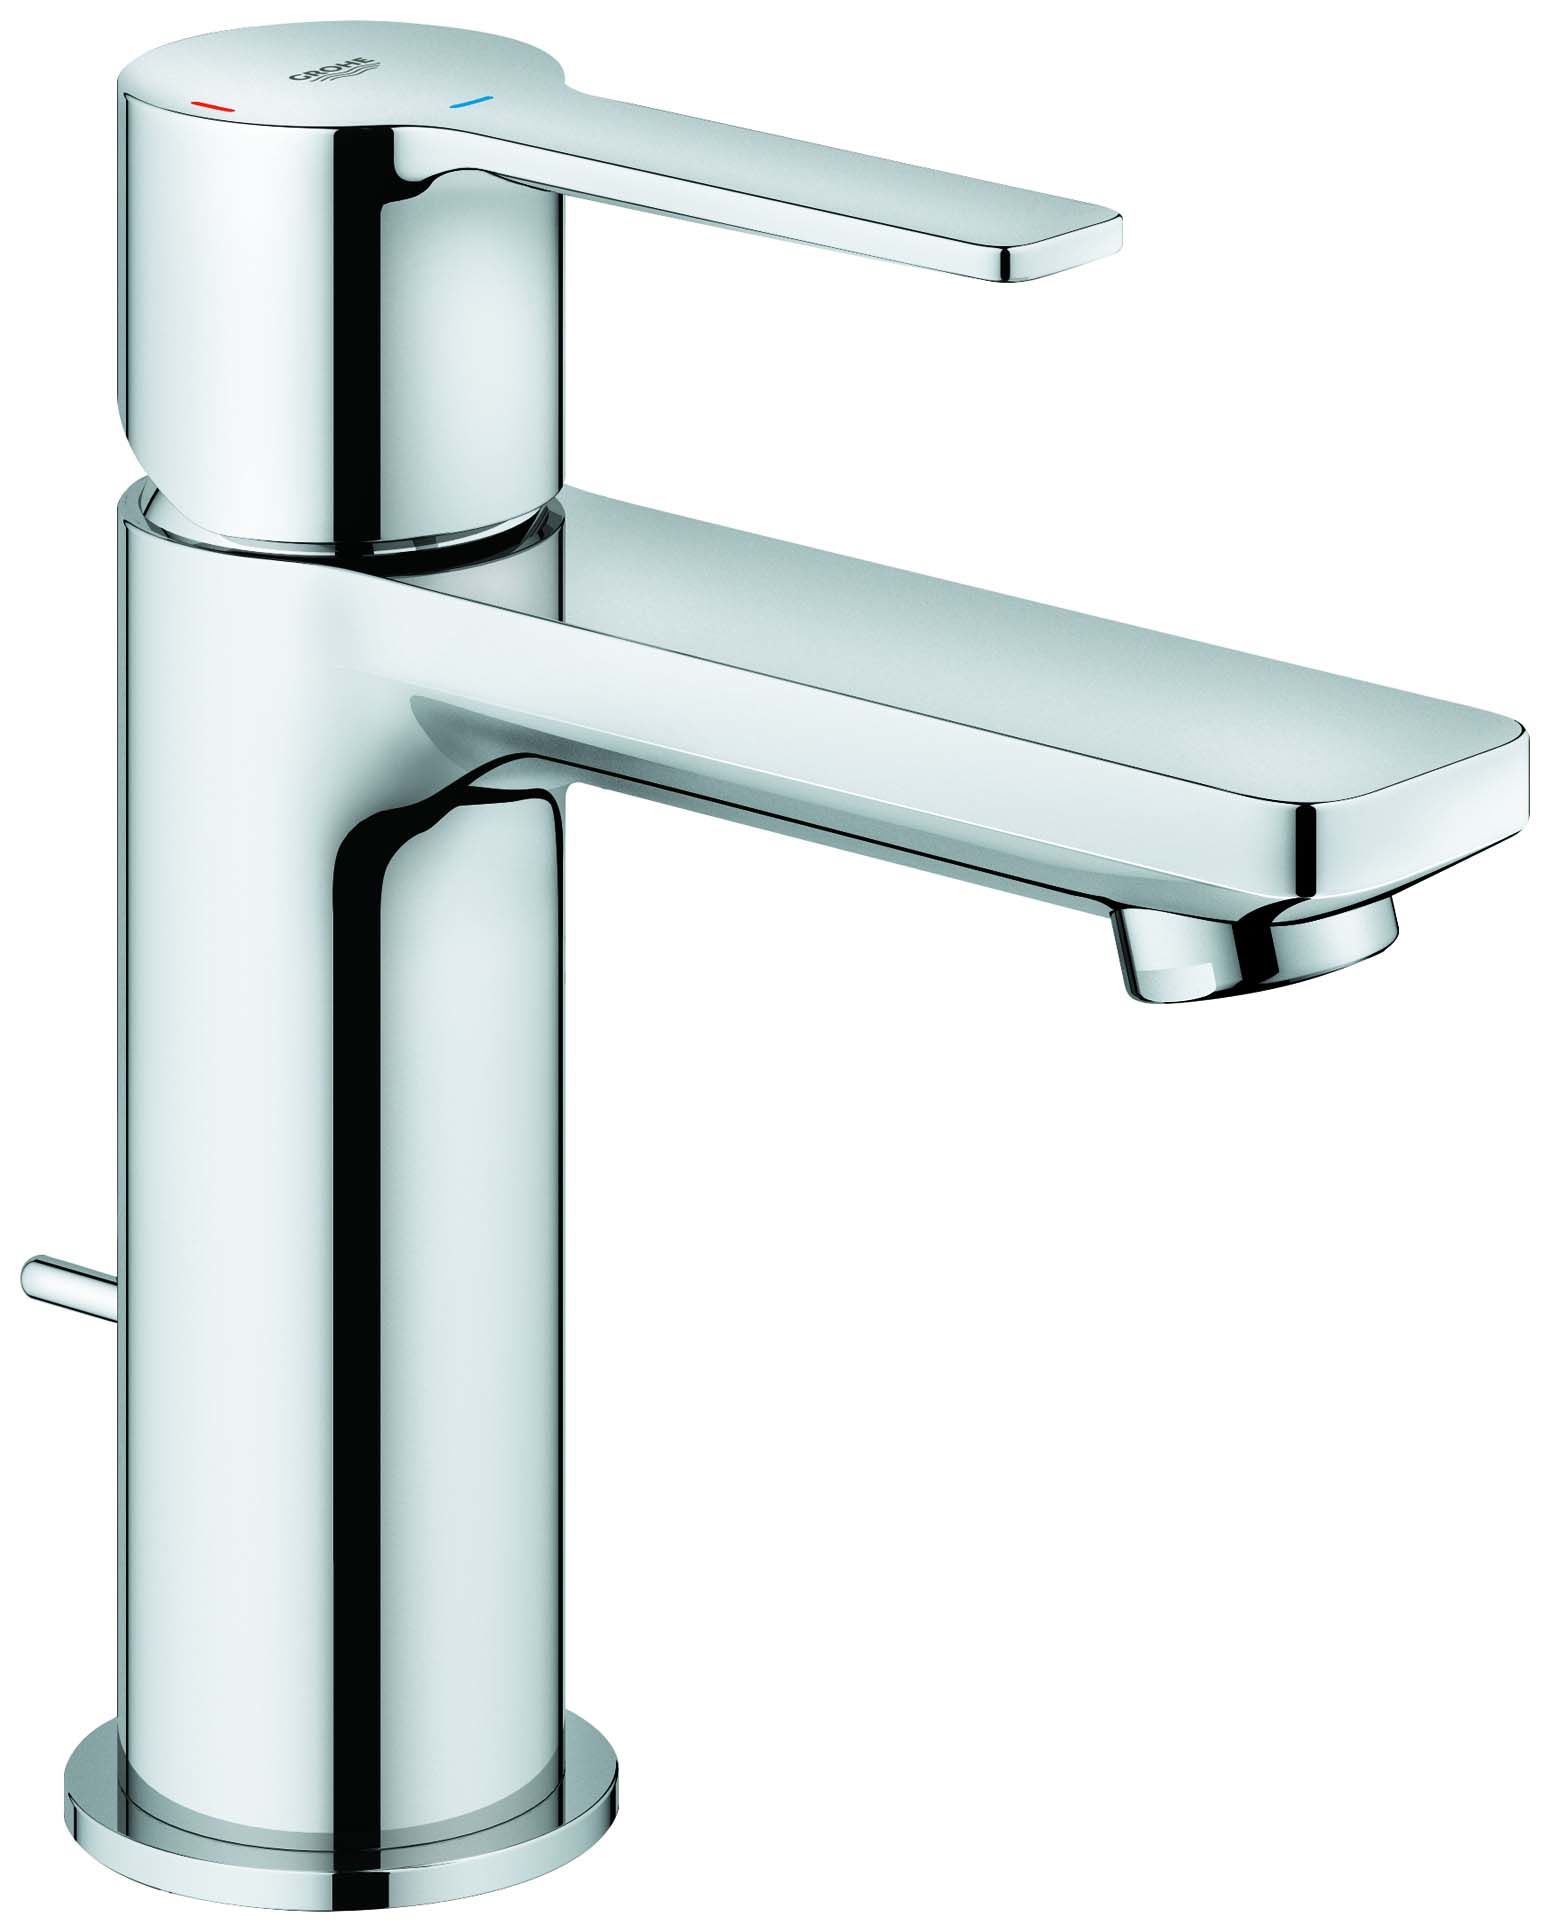 Grohe Lineare XS basin mixer 23790001 chrome, with Grohe Lineare